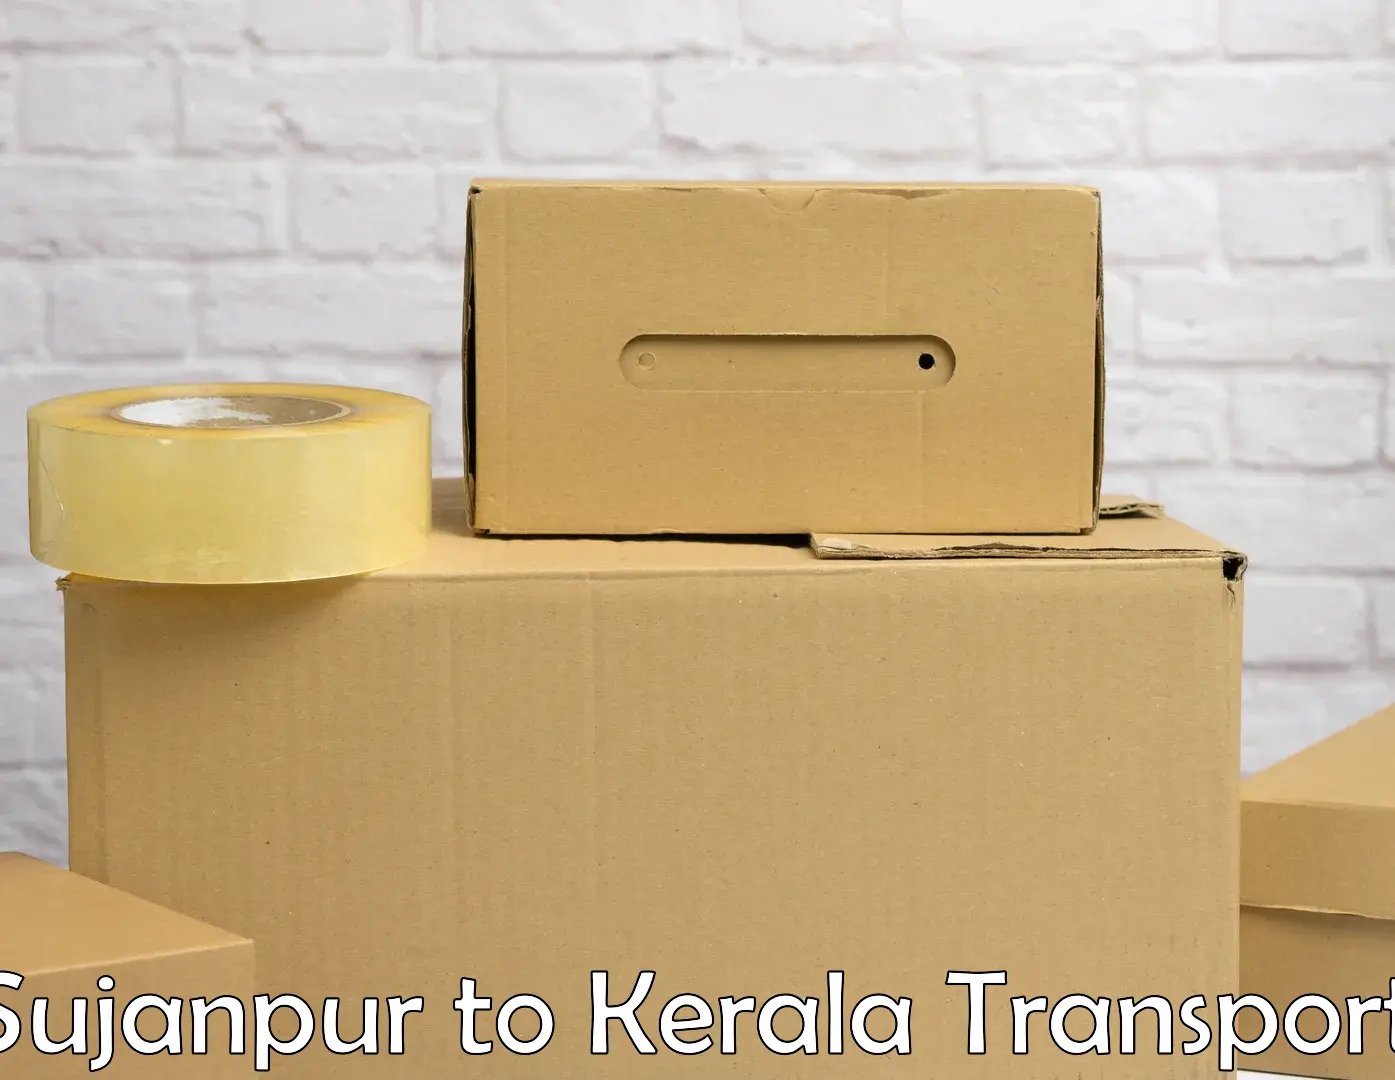 Container transport service Sujanpur to Cochin University of Science and Technology